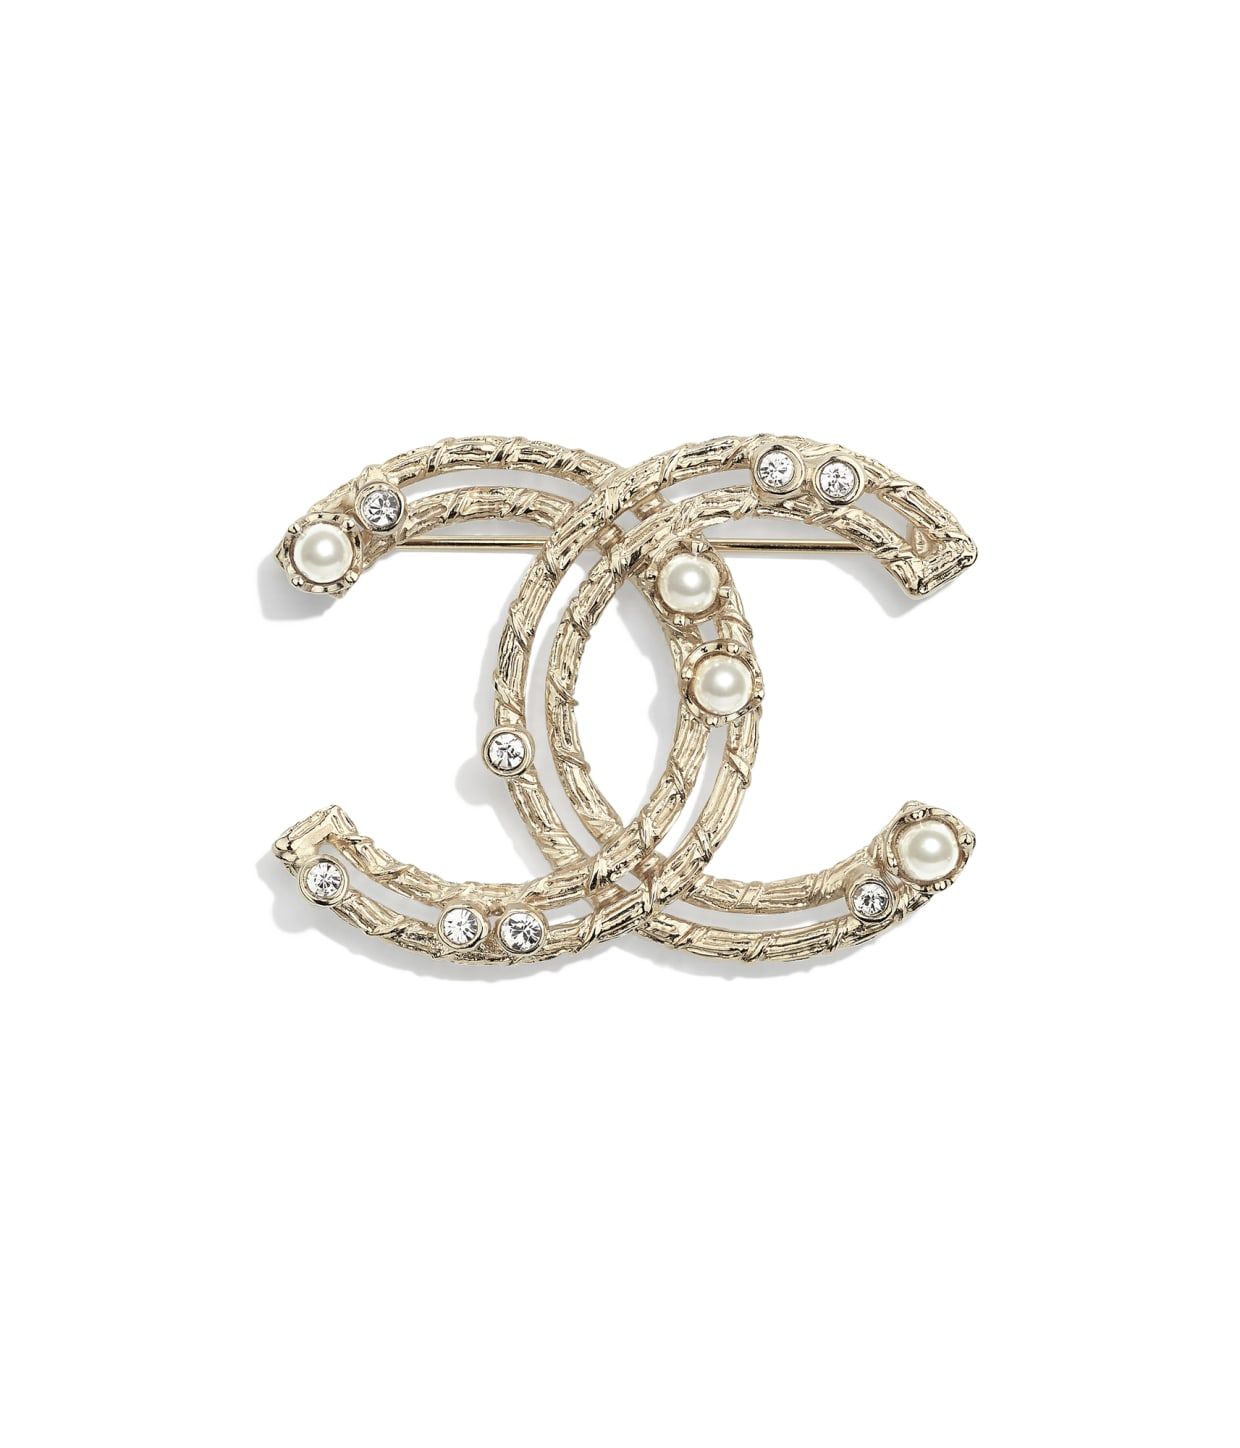 Metal, Glass Pearls & Strass Gold, Pearly White & Crystal Brooch | Chanel, Inc. (US)